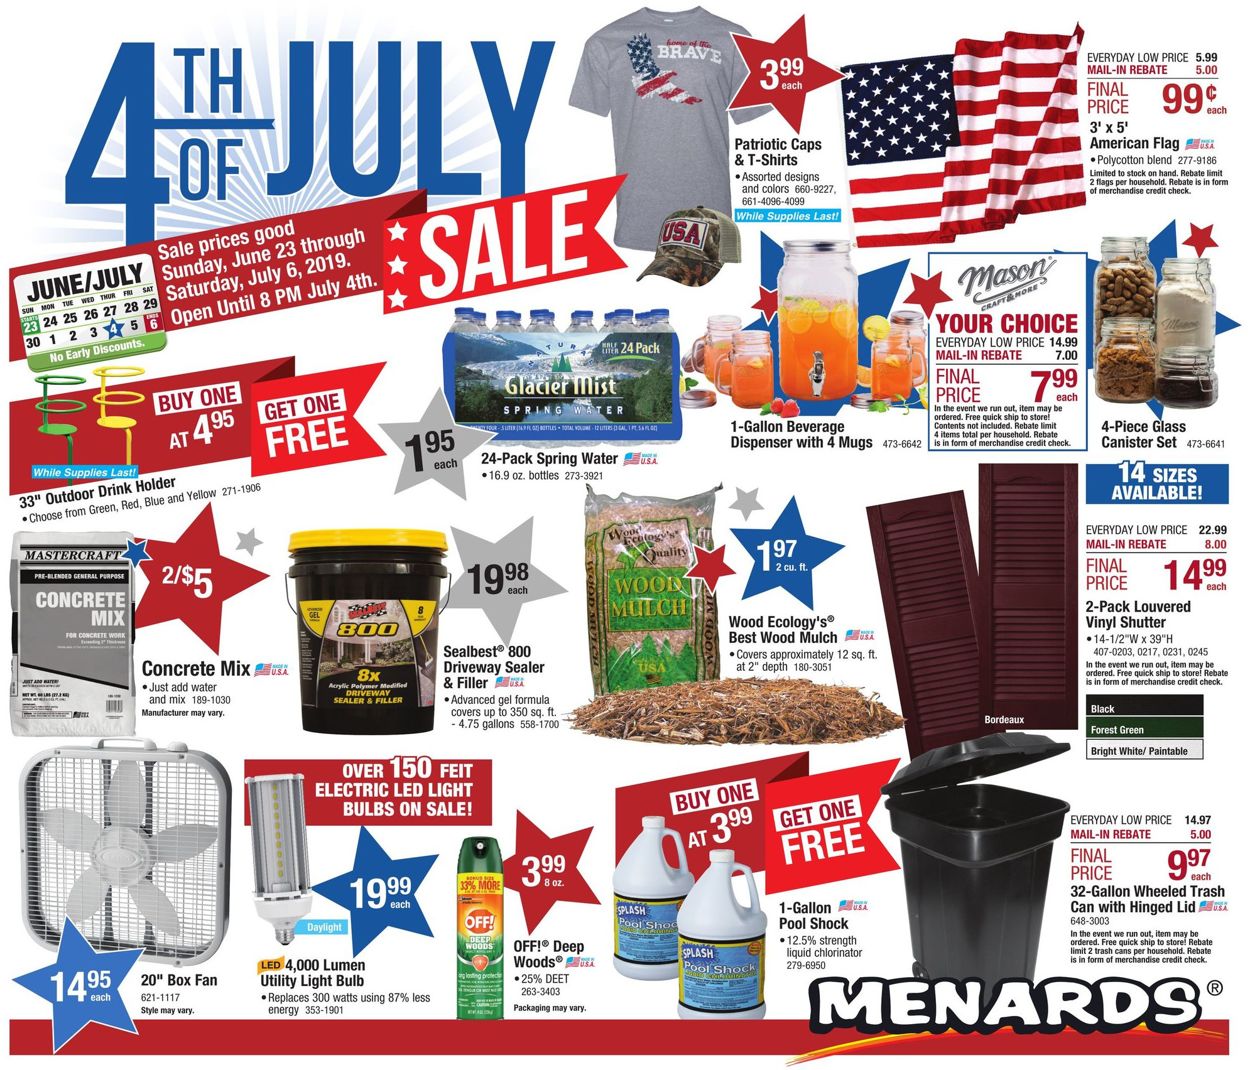 Menards Current weekly ad 06/23 - 07/06/2019 [3] - 0